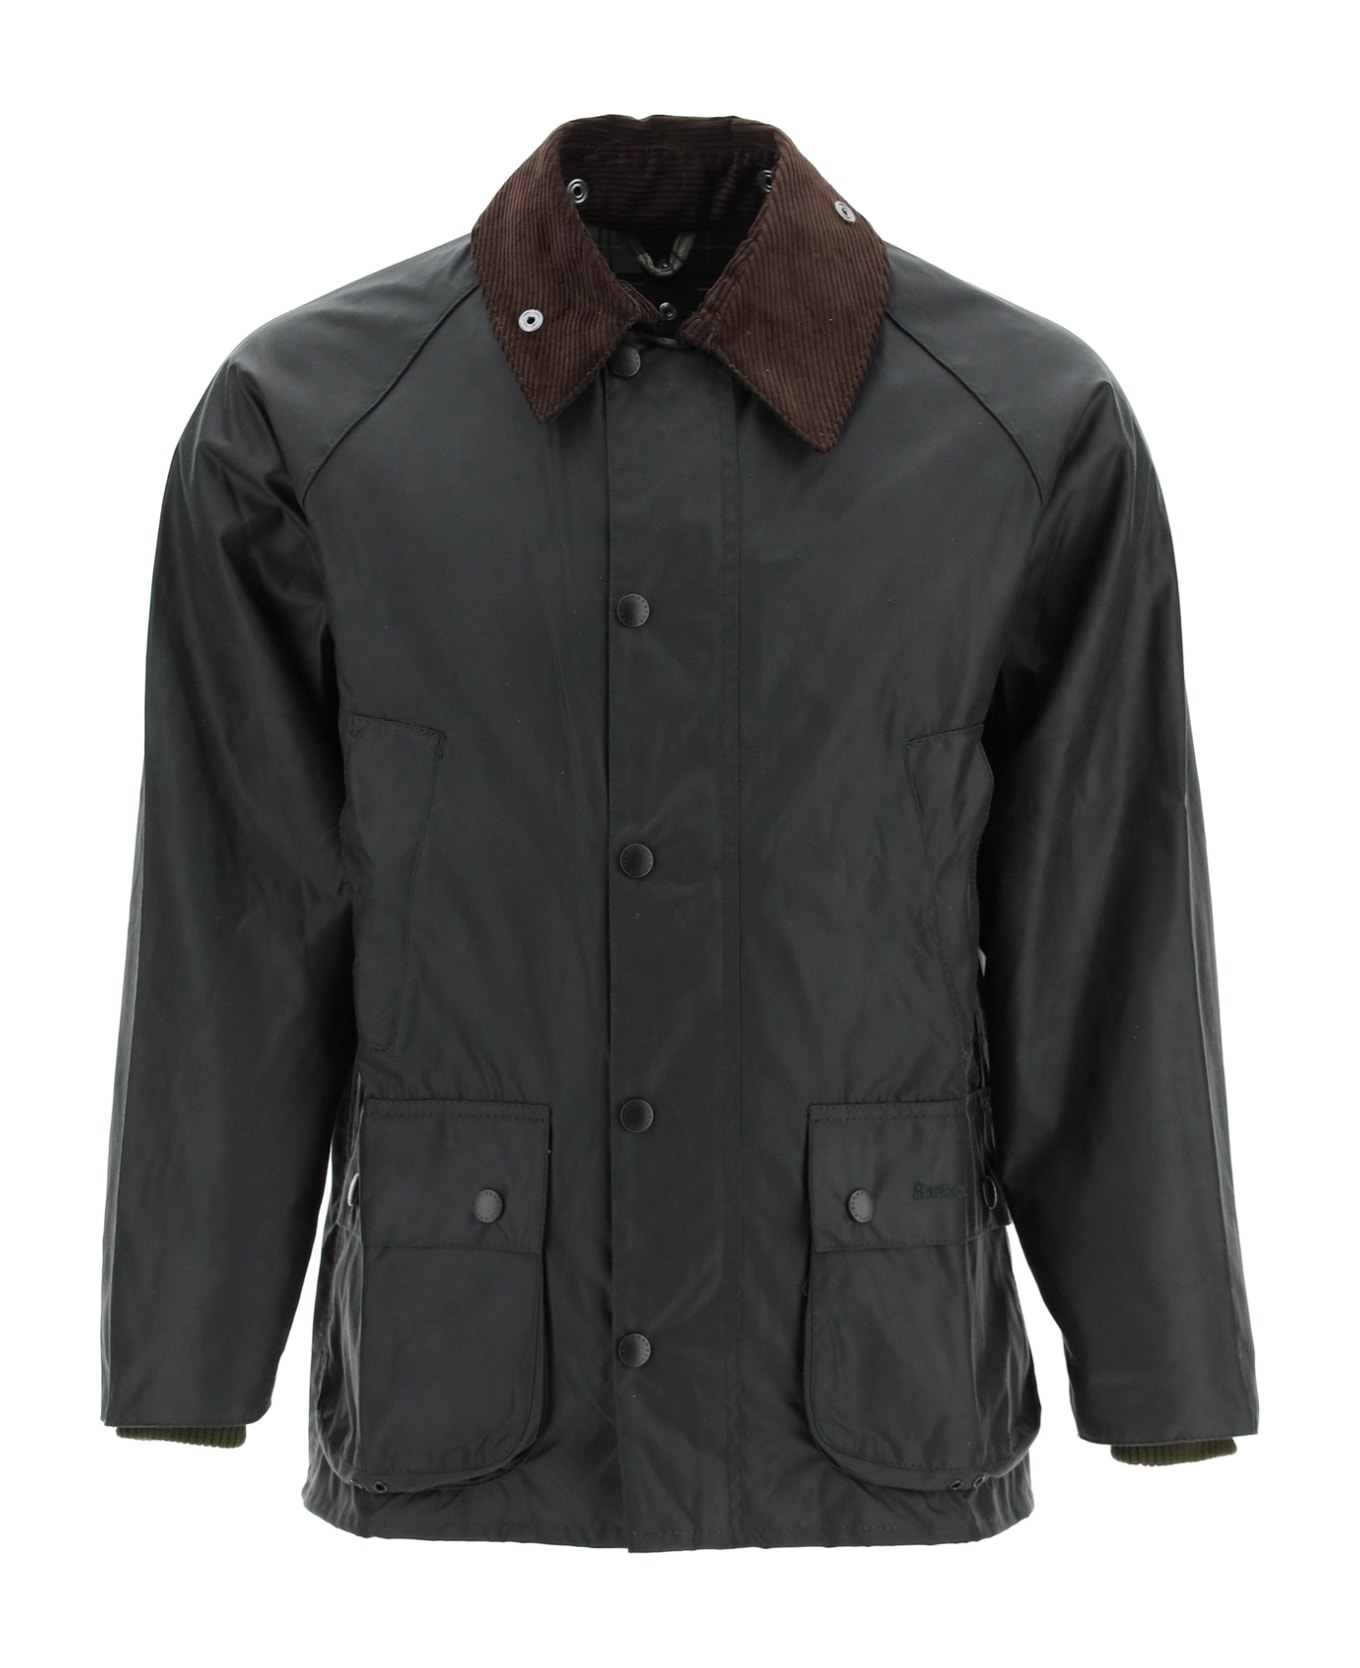 Barbour Bedale Waxed Jacket - SAGE (Green)